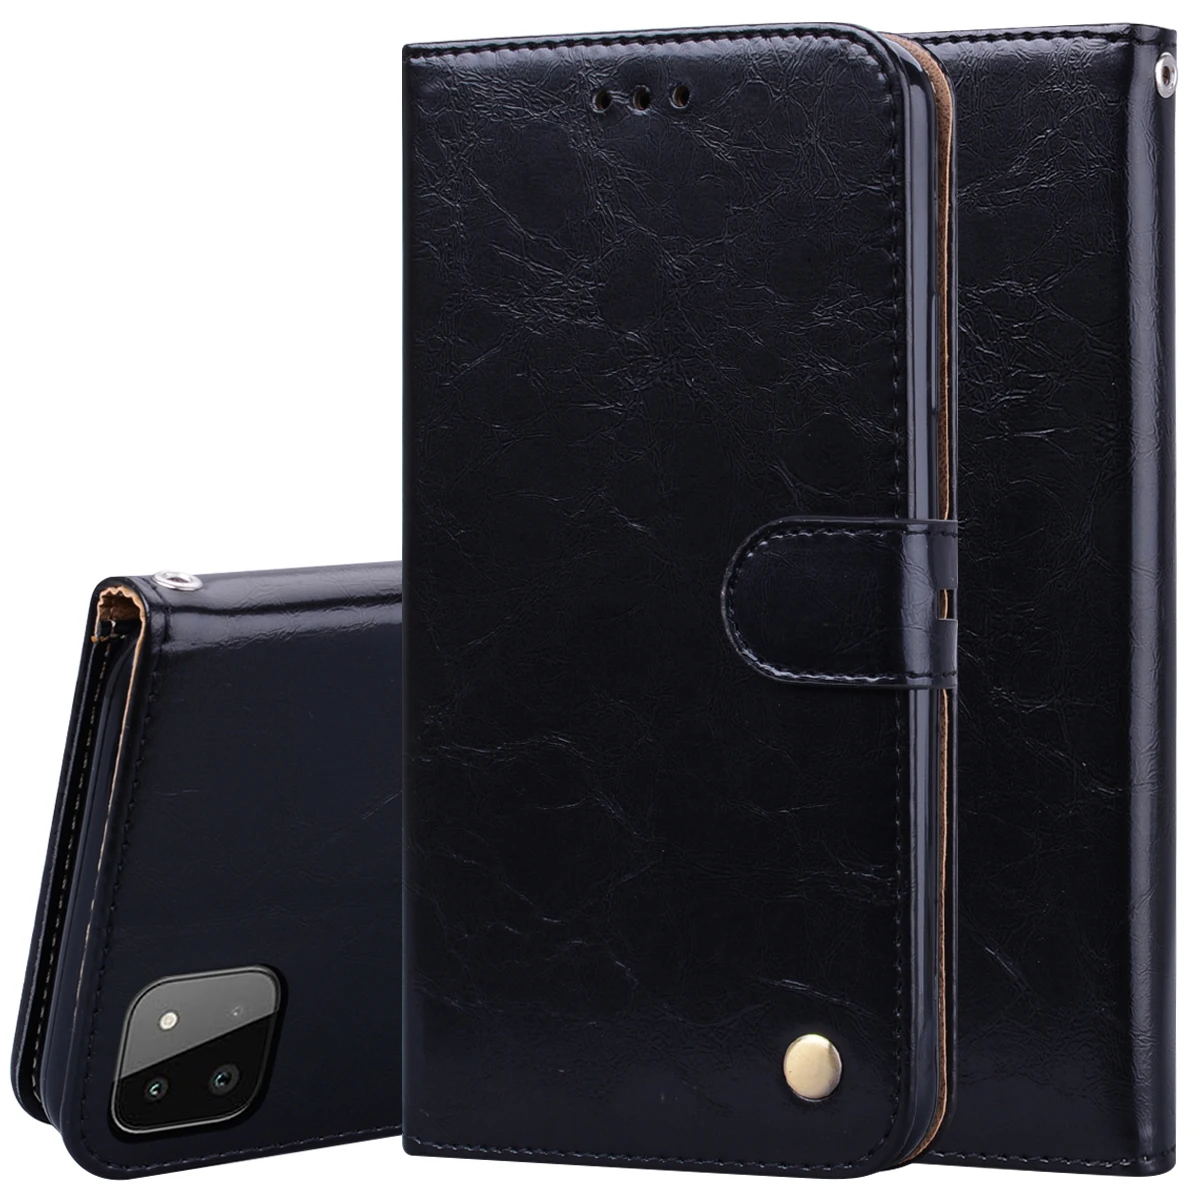 

Leather Wallet Flip Case For Samsung Galaxy A22 5G SM-A226B Case Card Holder Book Cover For Samsung A 22 4G SM-A225F Phone Case